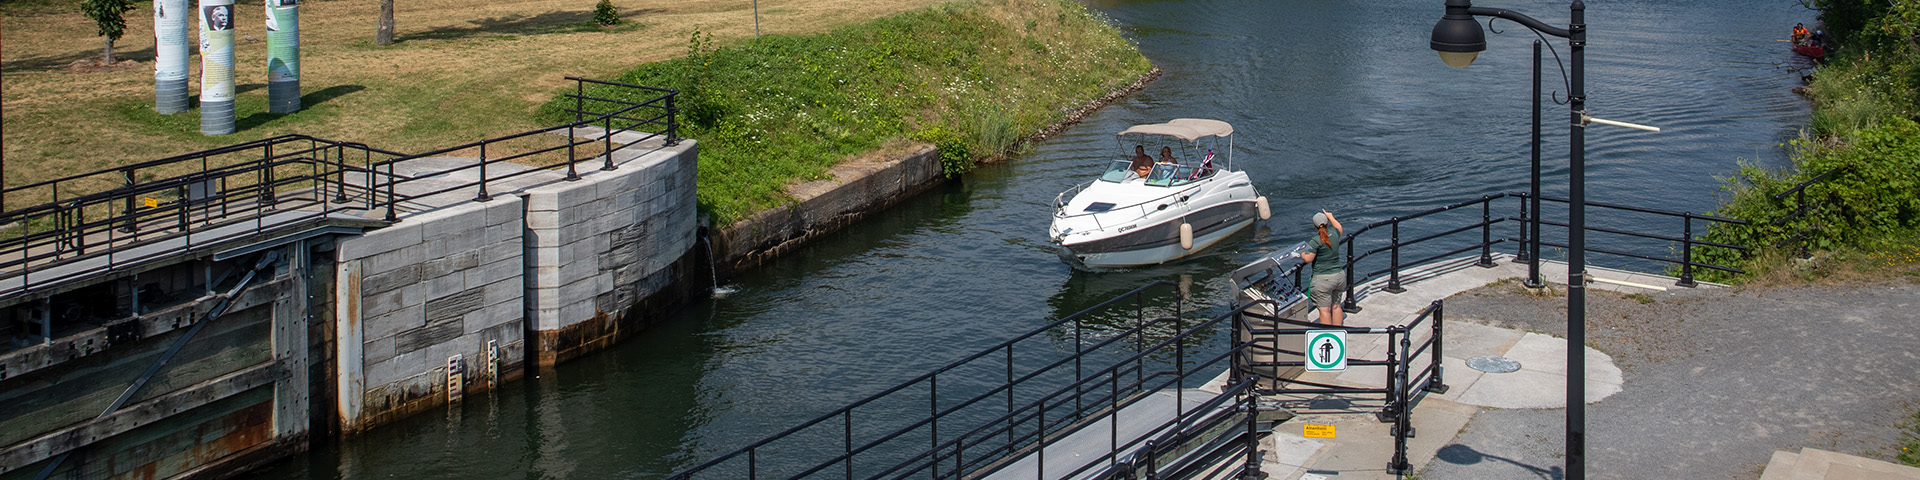 Sail the Lachine Canal locks with your boat.